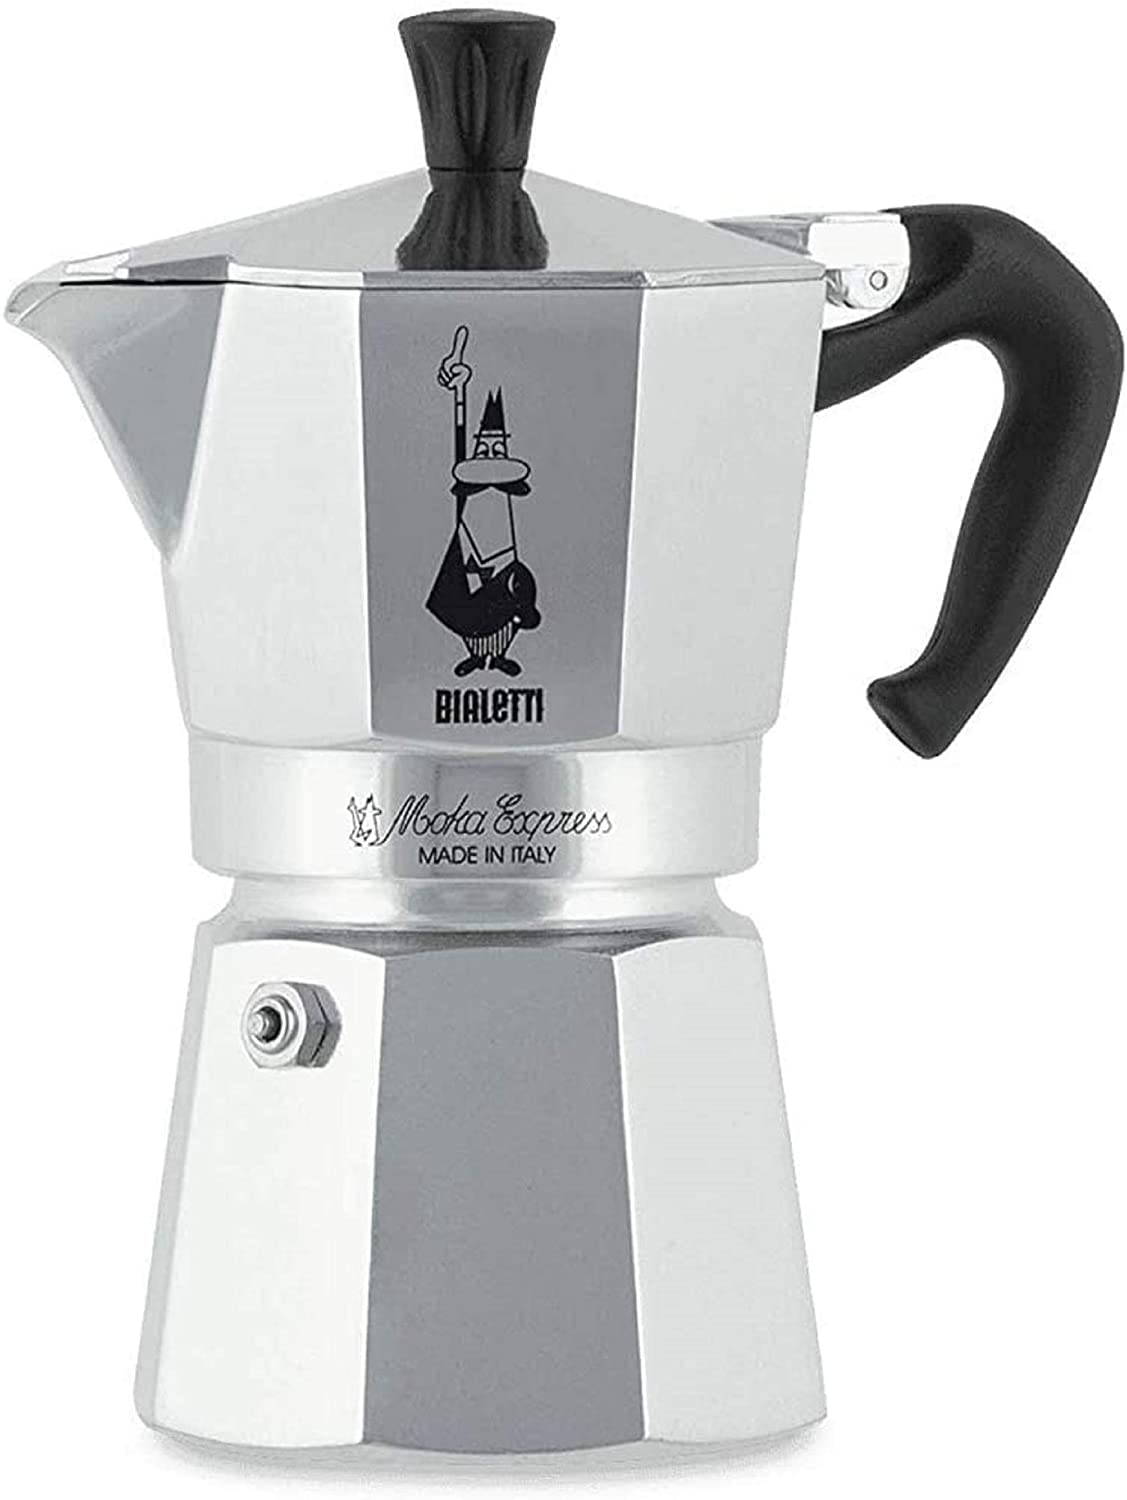 bialetti father's day gift